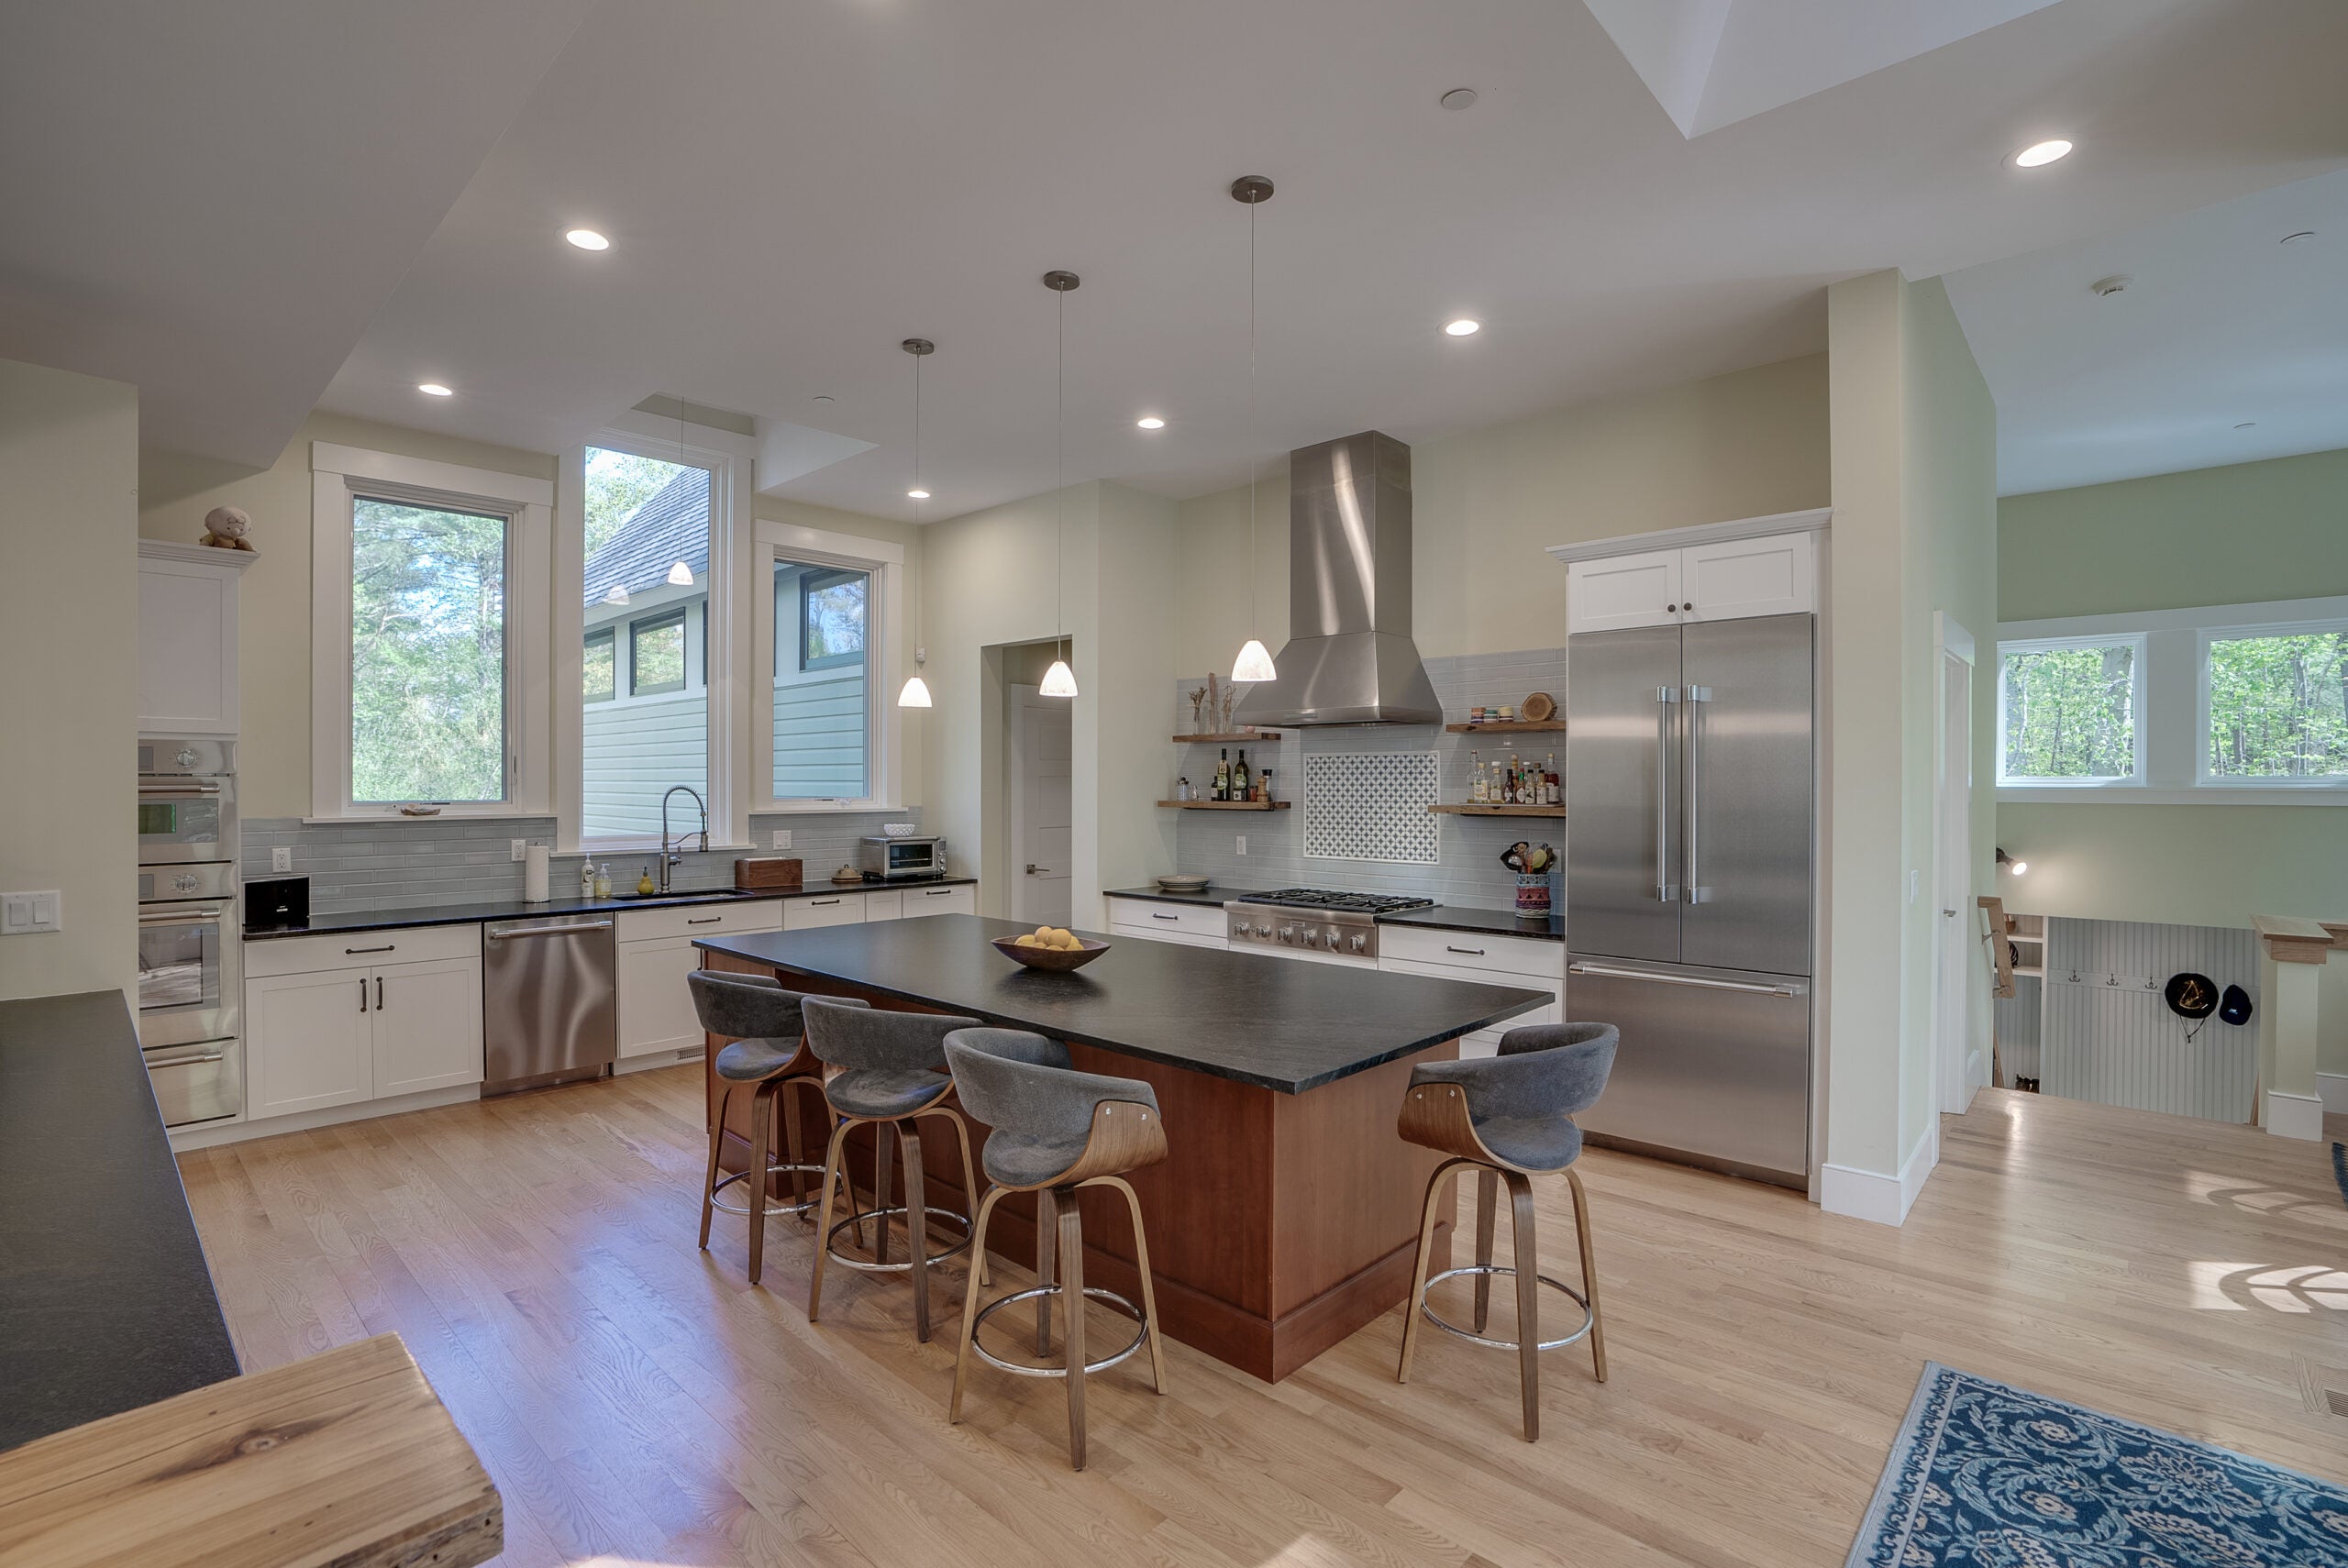 A kitchen island with a dark top and seating for four. The appliances are stainless steel. There are three pendant lights and recessed lighting. Three tall windows sit over the sink in the background. The flooring is wood.